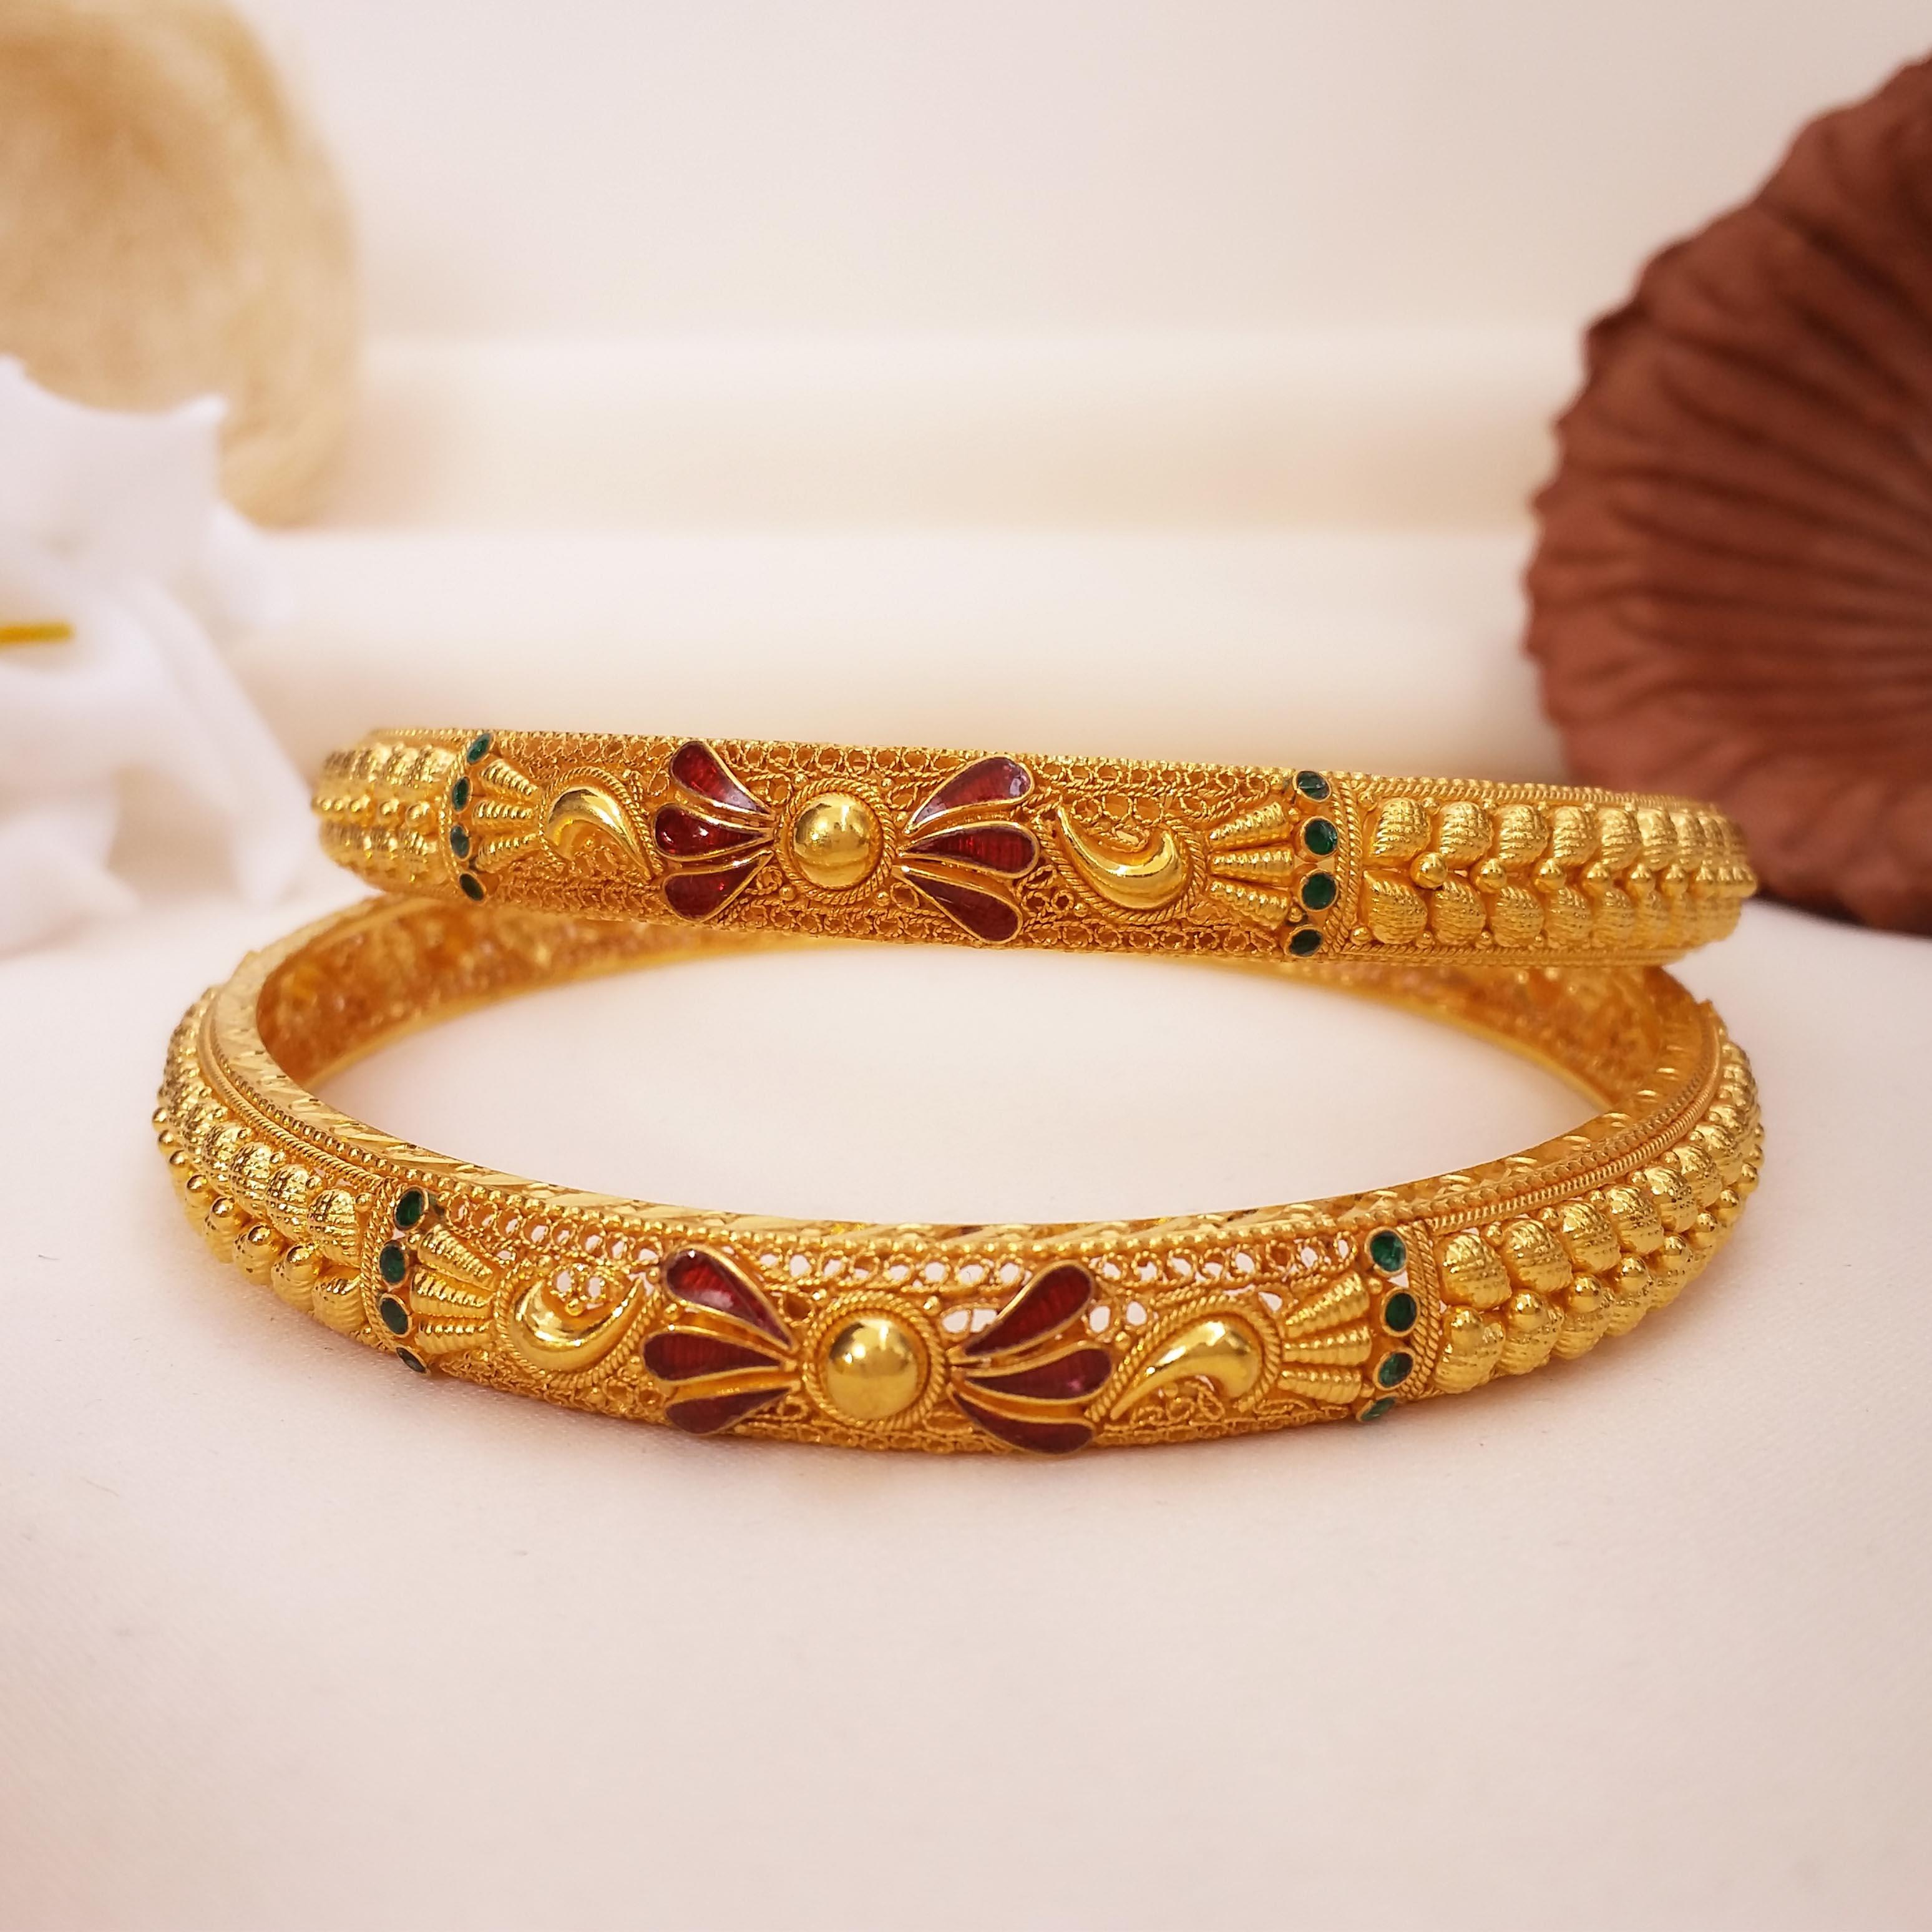 Buy Dickens Gold Bangle 22 KT yellow gold (29 gm). At Best Price In India. Check Bangles & Bracelets New Designs At Giriraj Jewellers. BIS Care, Hallmark, 100% Certified | Trust & Quality of Giriraj Jewellers India | 24k gold bangles online | gold bangles for women new design | bracelet designs for wedding | buy gold diamond bangles | new gold bangles design | gold bracelet for mens with price | latest designs of gold bangles and kadas | trendy gold bangle for daily wear | gold bangles new design | gold kangan designs with price